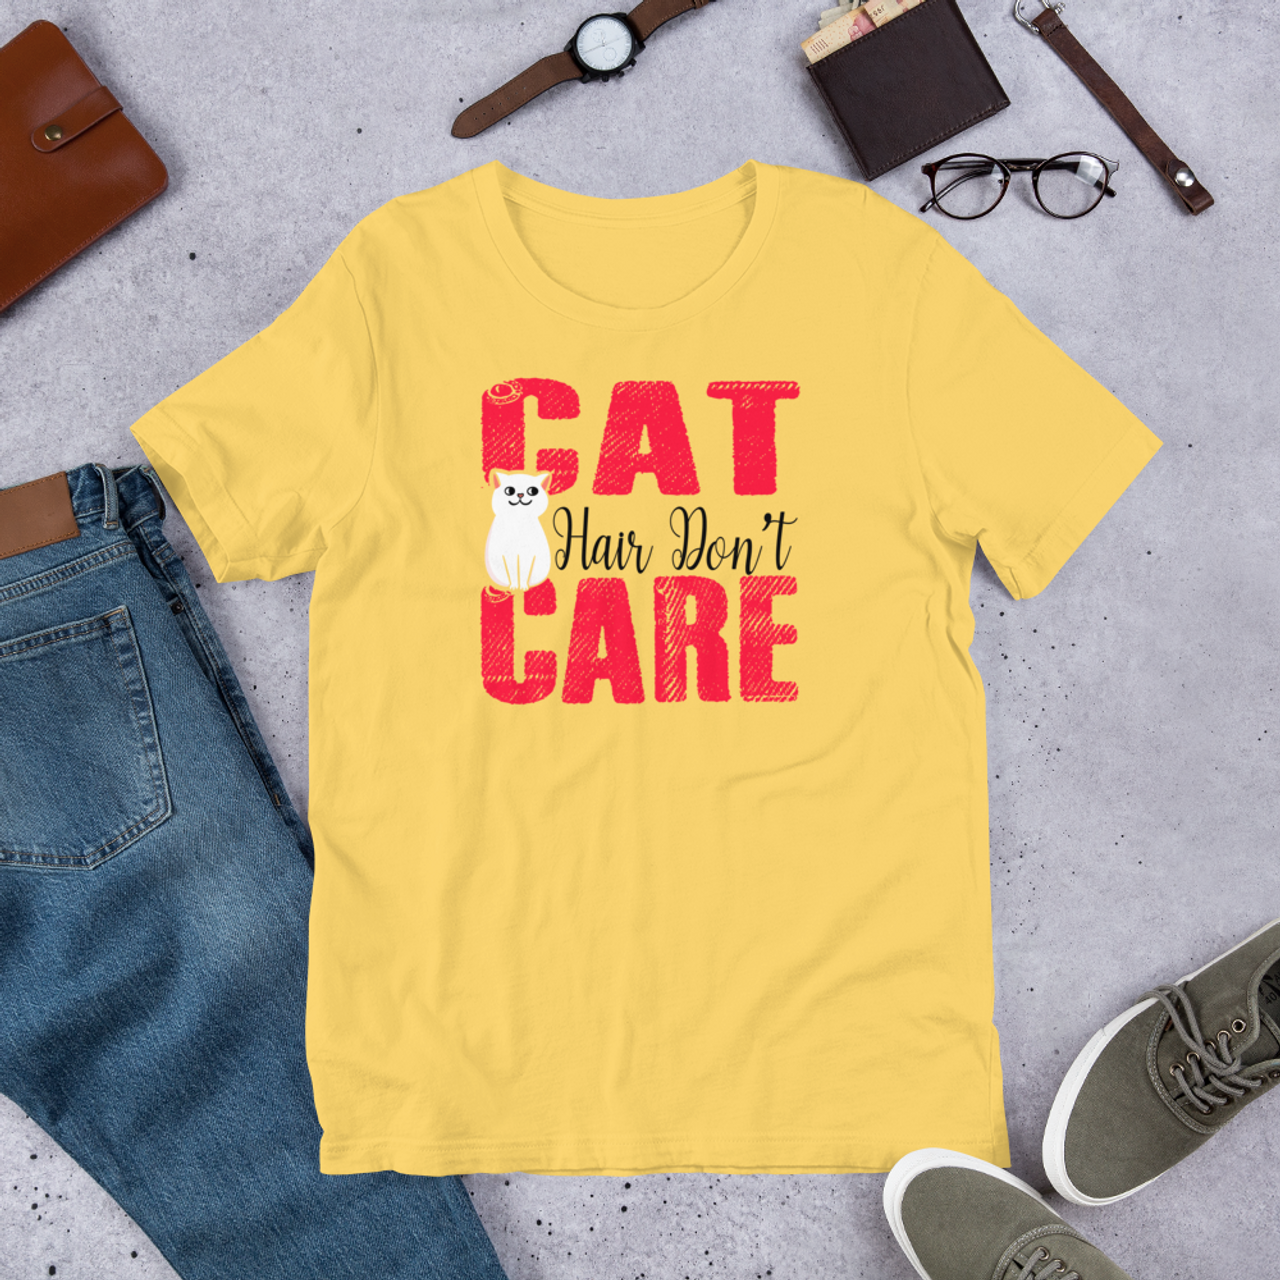 Yellow T-Shirt - Bella + Canvas 3001 Cat Hair Don't Care